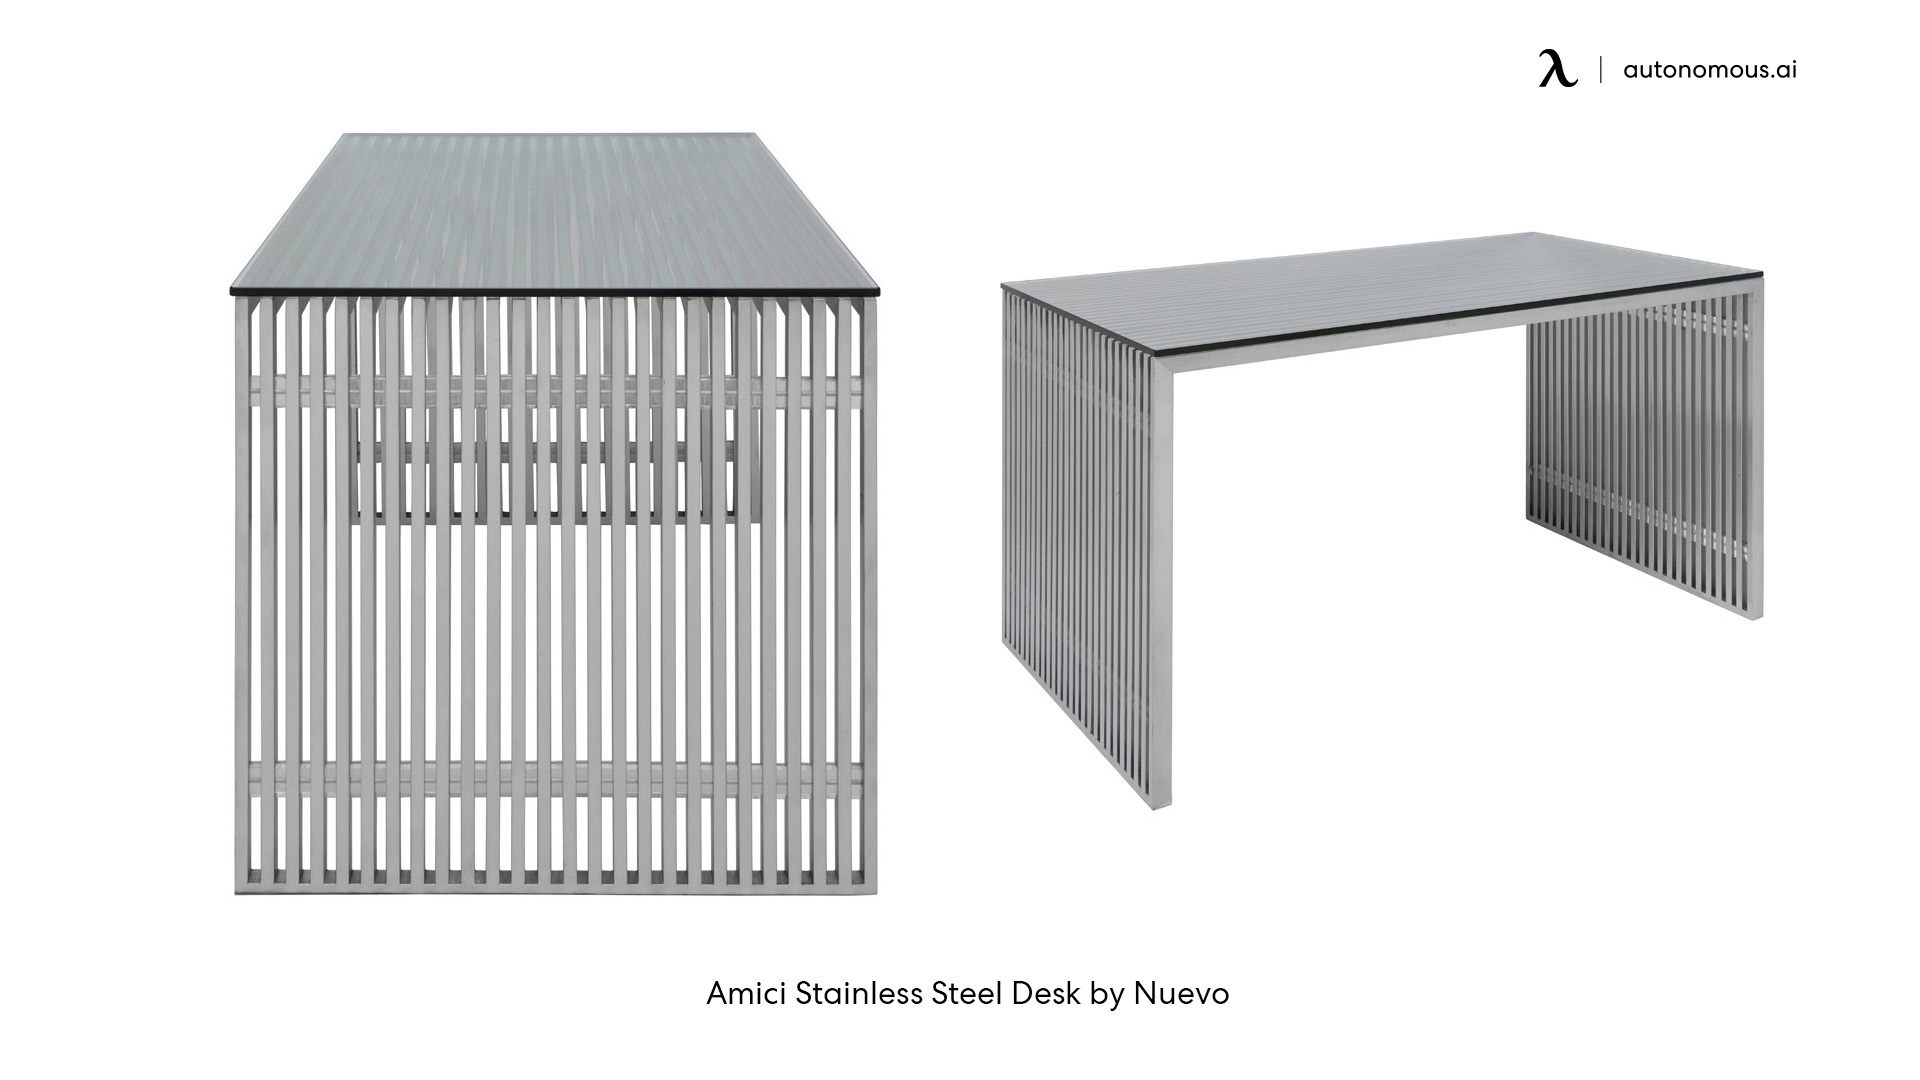 Amici Stainless Steel Desk by Nuevo